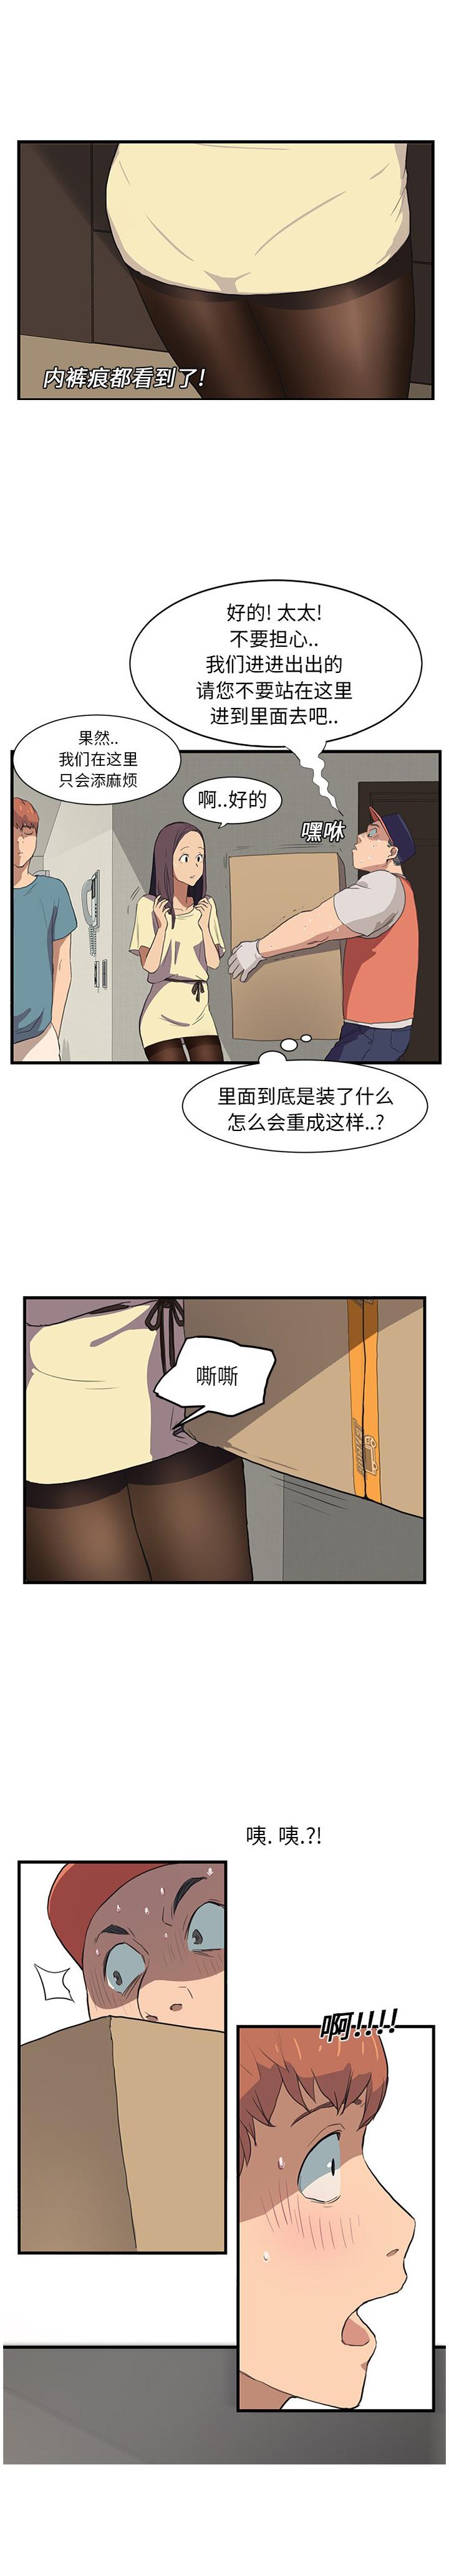 Trans 继母 1-8 Chinese Bathroom - Page 11